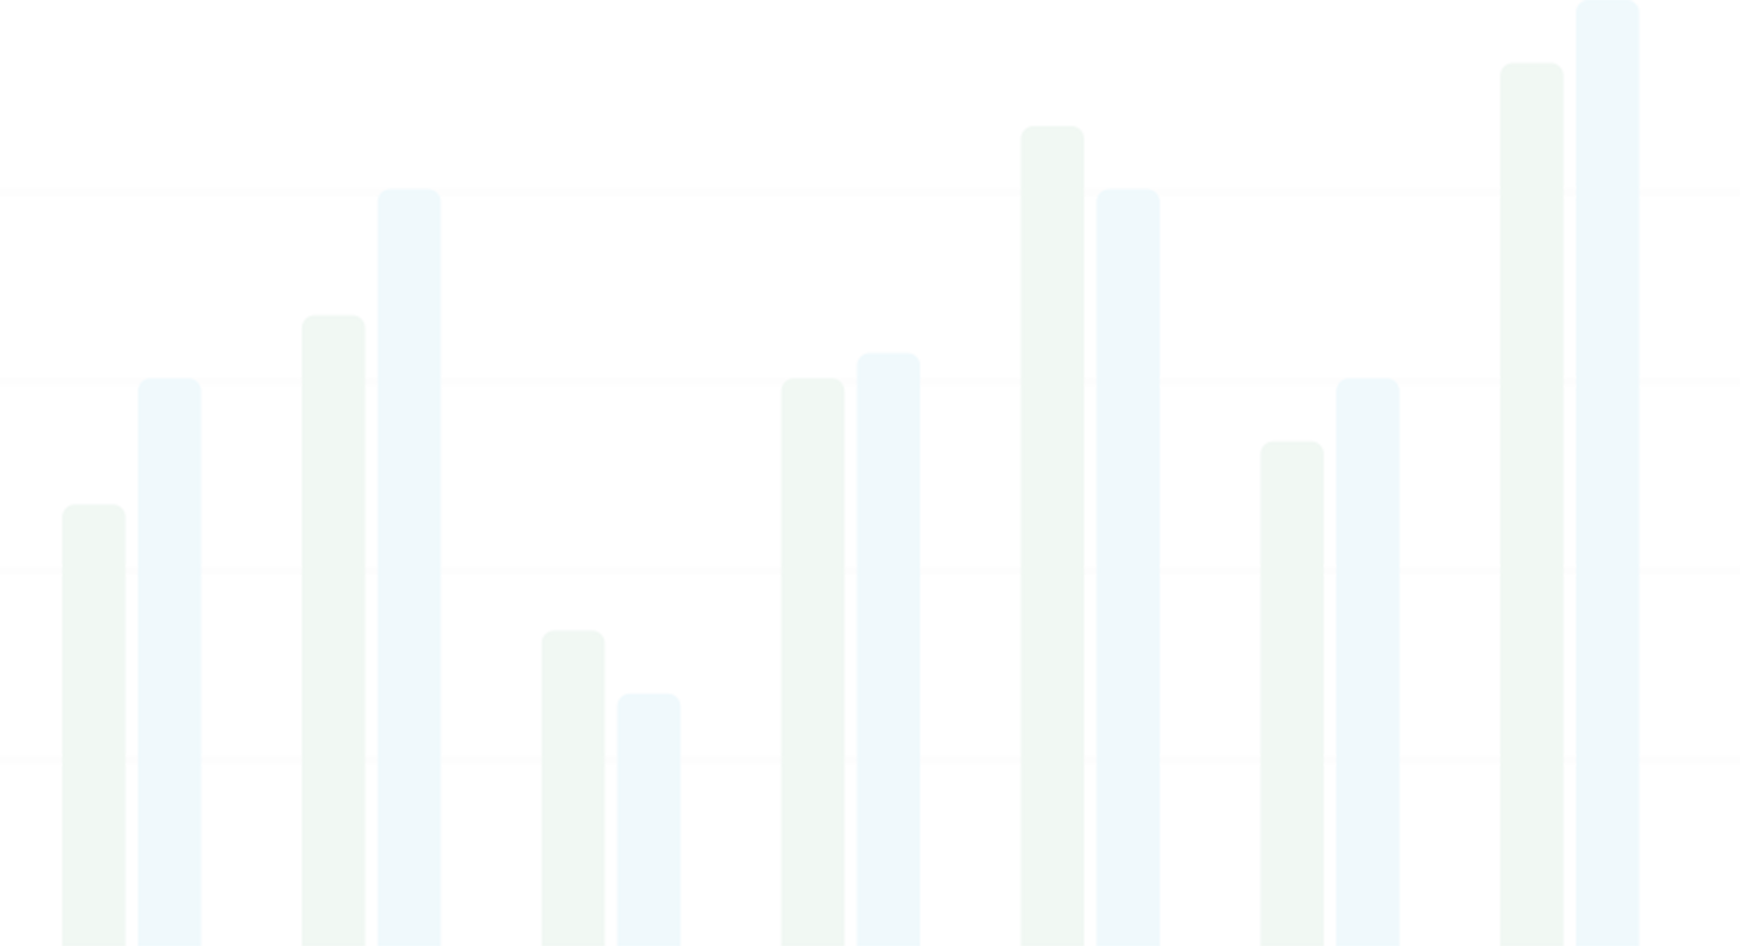 a stylized bar graph showing green and blue vertical bars